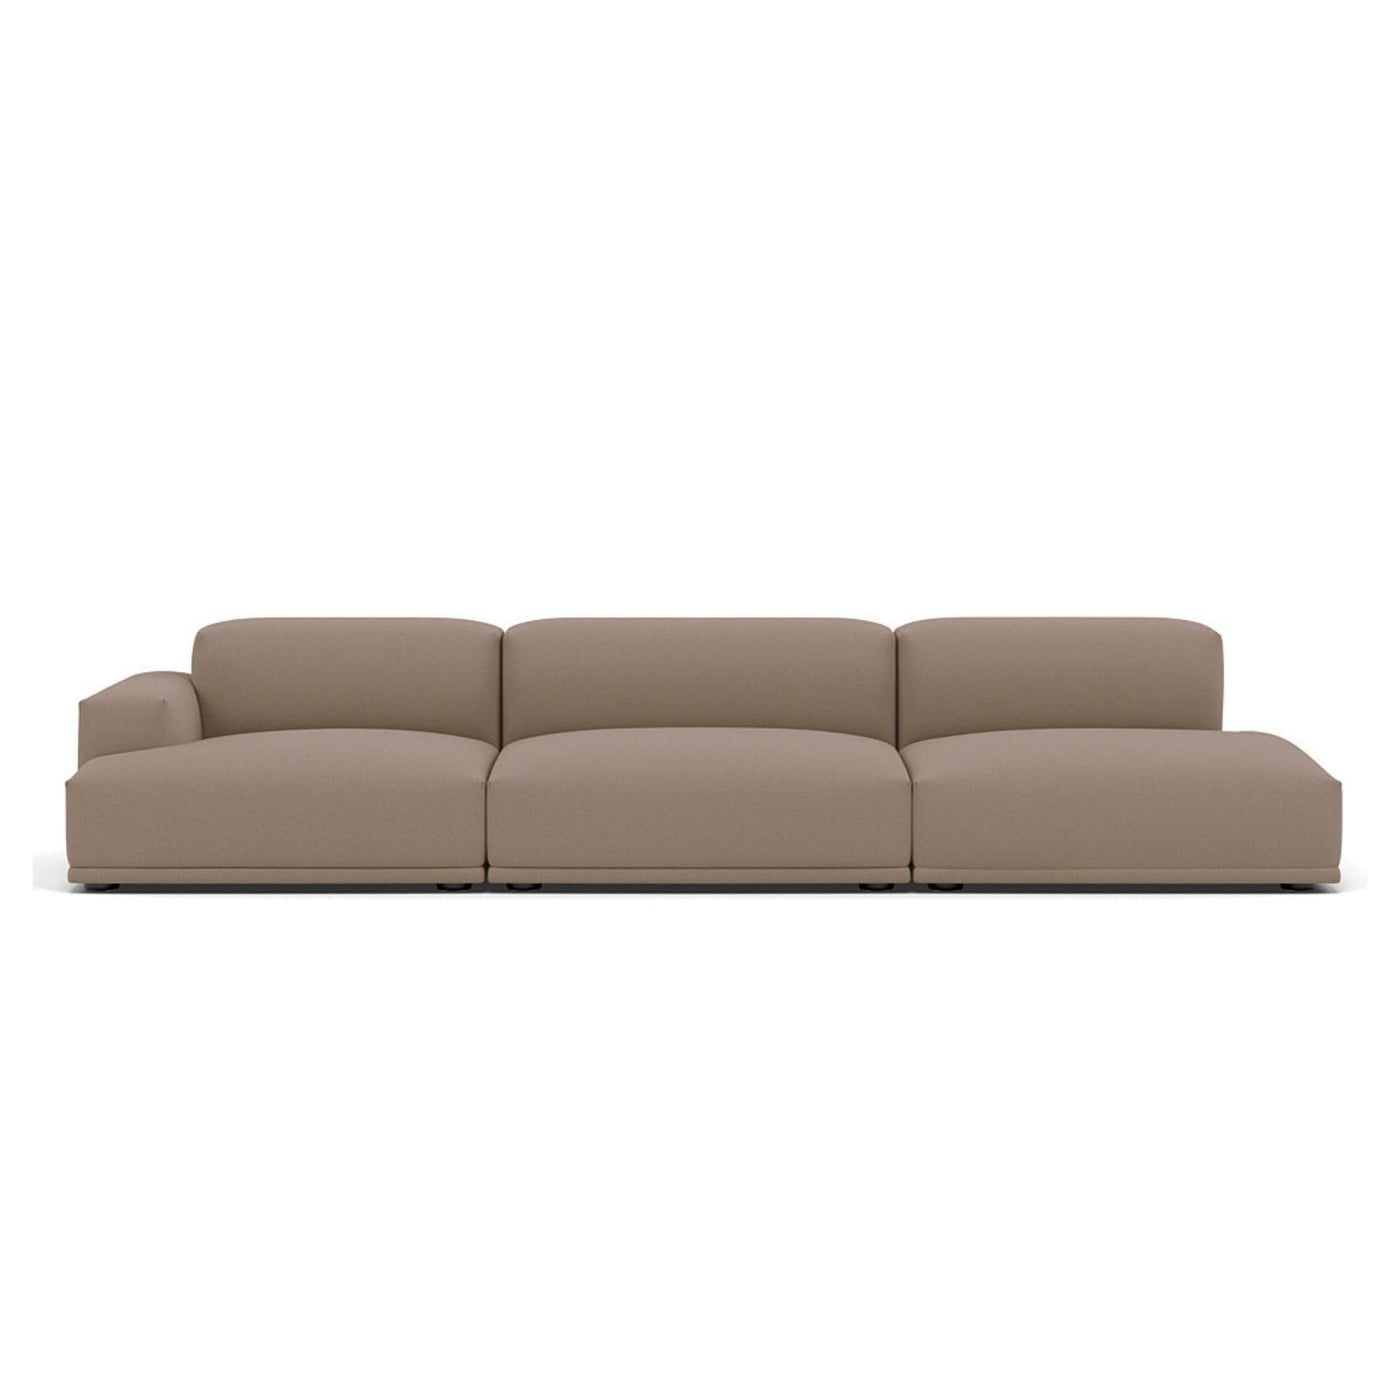 Muuto Connect modular sofa 3 seater in configuration 2. Made to order from someday designs. #colour_steelcut-trio-426